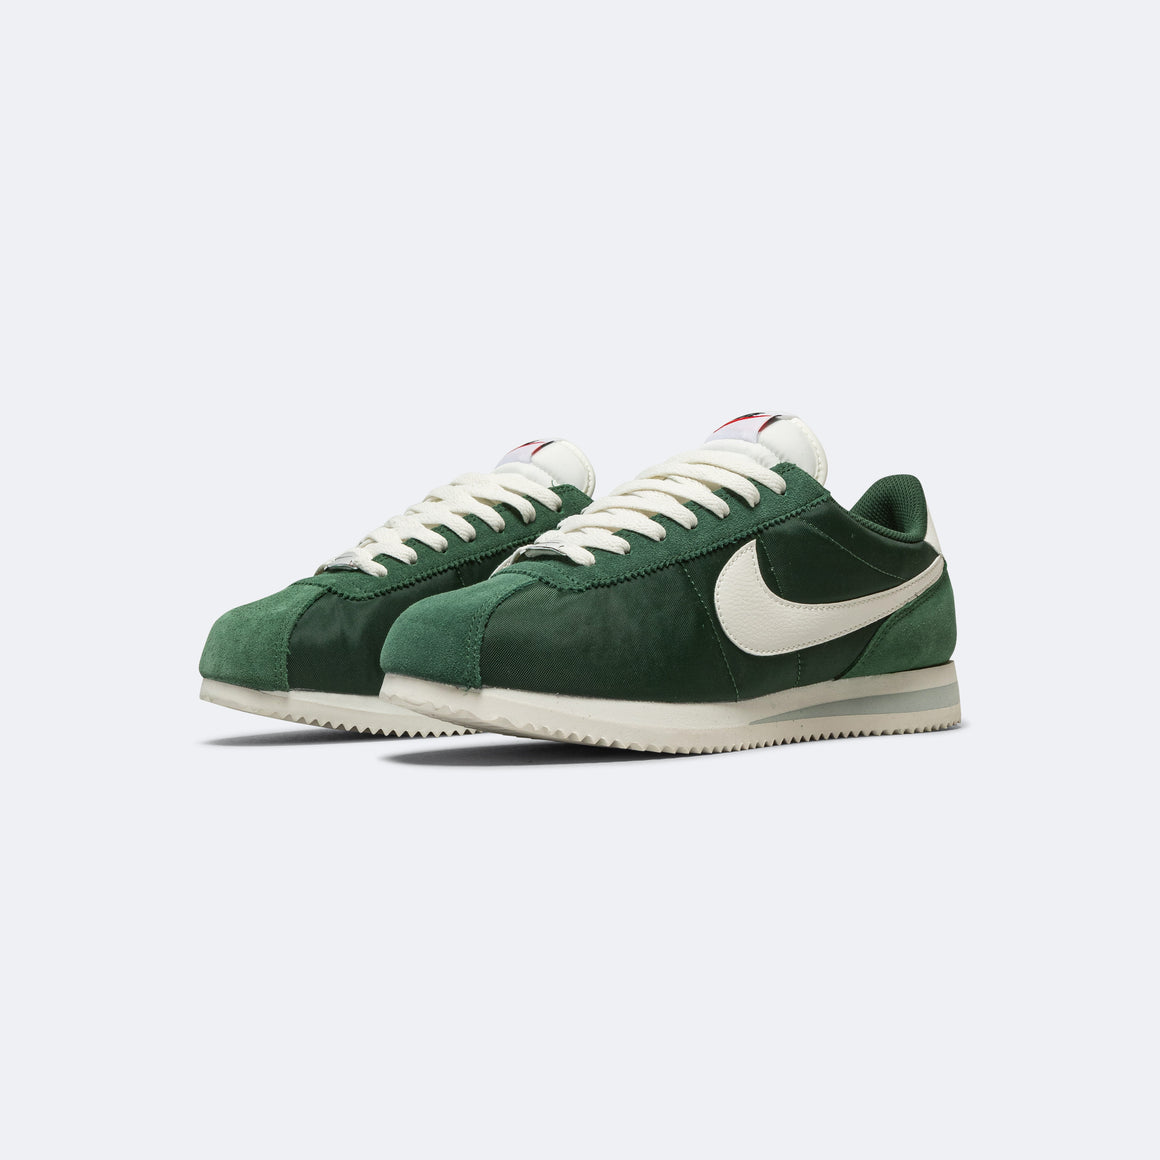 Nike - Womens Cortez - Fir/Sail - UP THERE